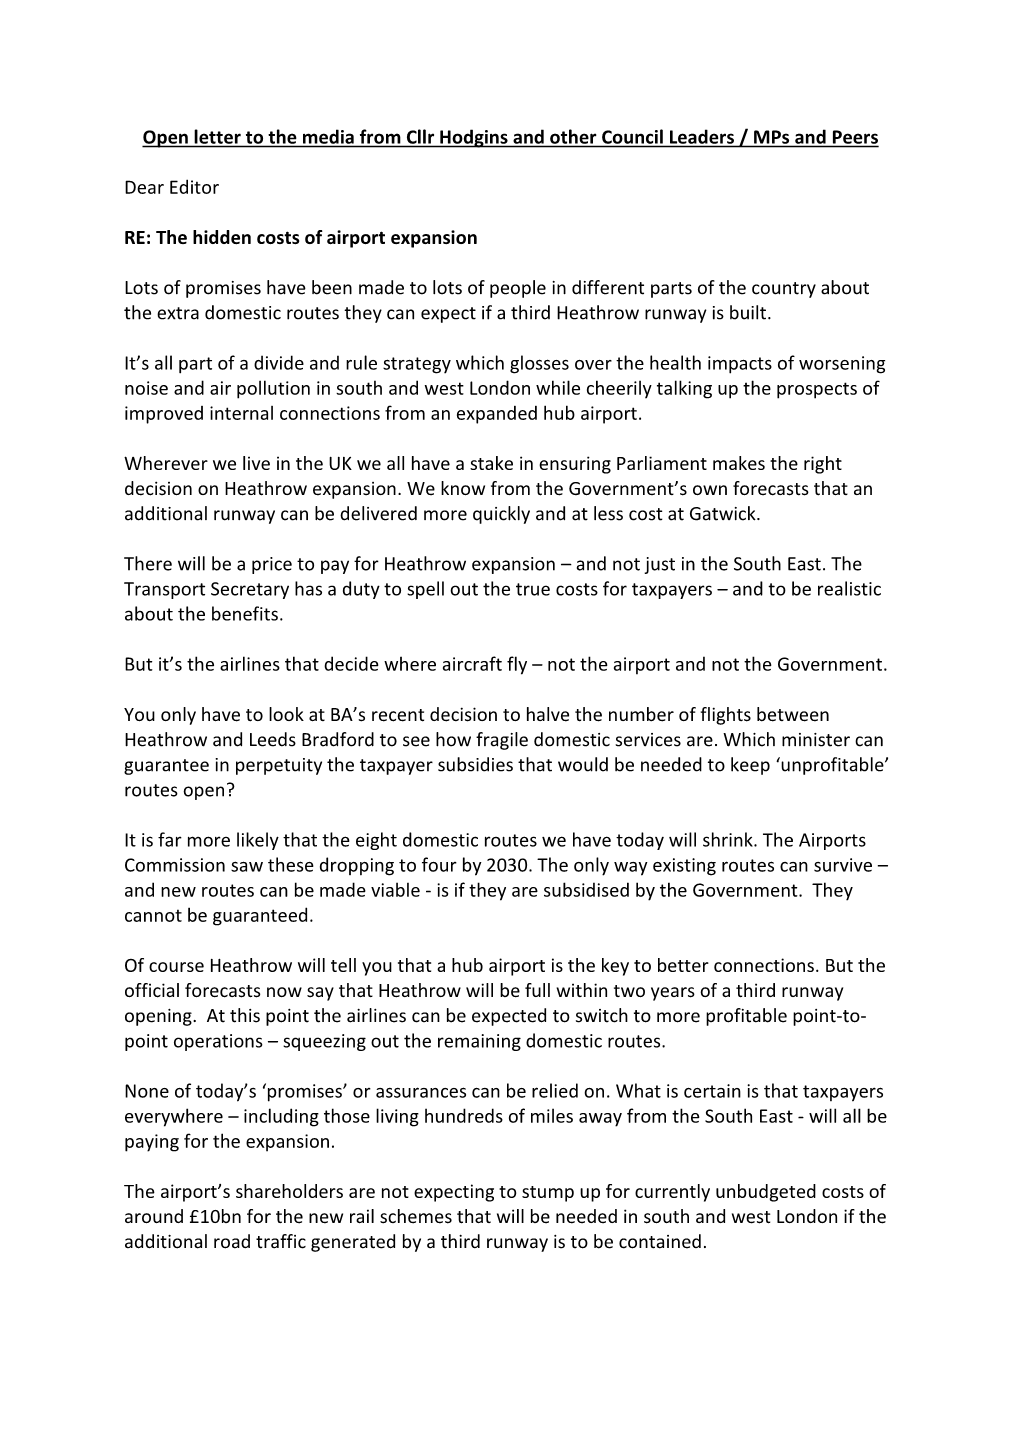 Open Letter to the Media from Cllr Hodgins and Other Council Leaders / Mps and Peers